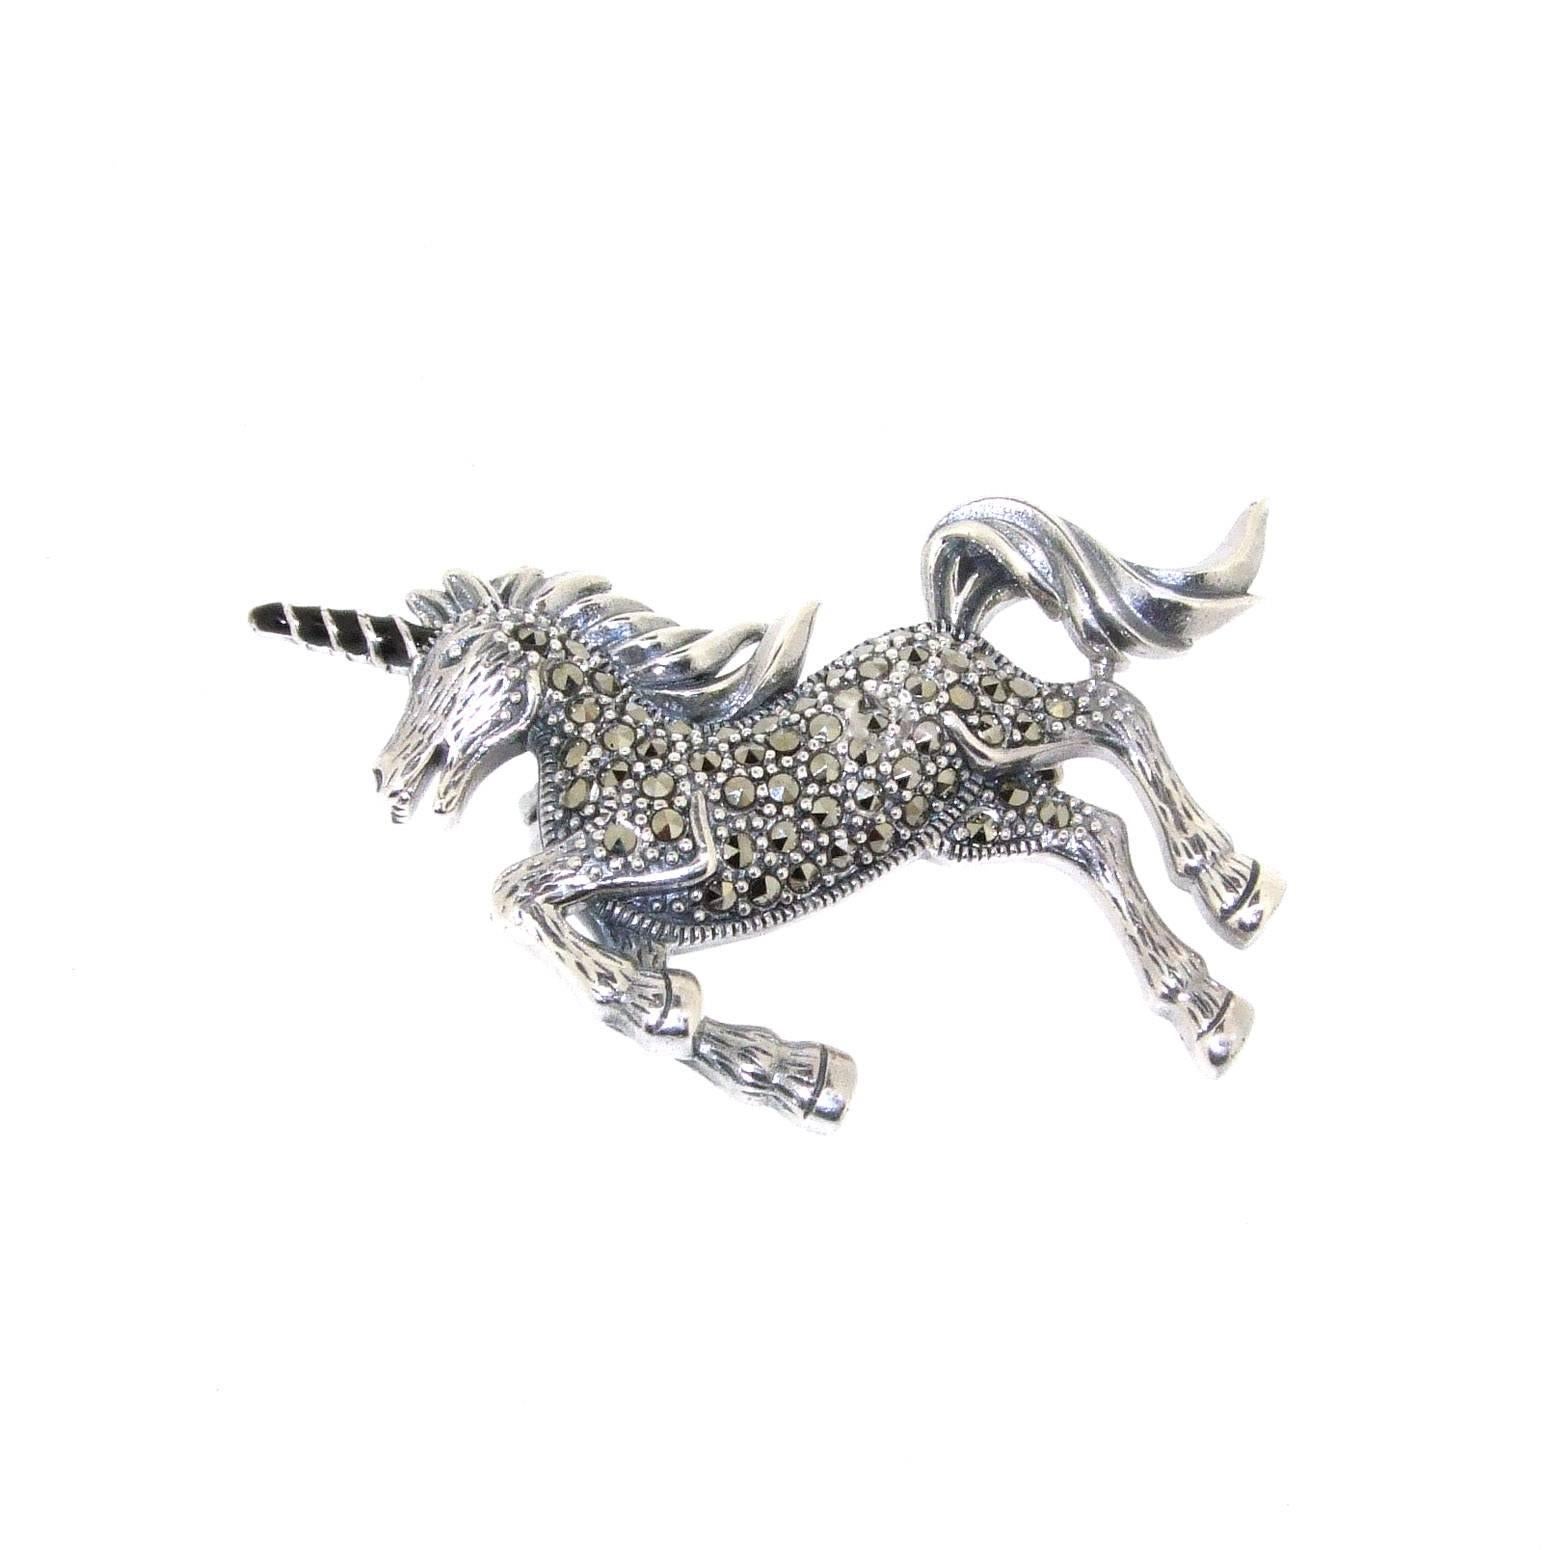 A sparkly unicorn brooch in sterling silver decorated with sparkling marcasites. There is a loop under the head so it can be worn as a pendant too.

It measures 4.5cm wide by 2.5cm high.

Our shop Hirst Antiques  is in London, Portobello Road. 